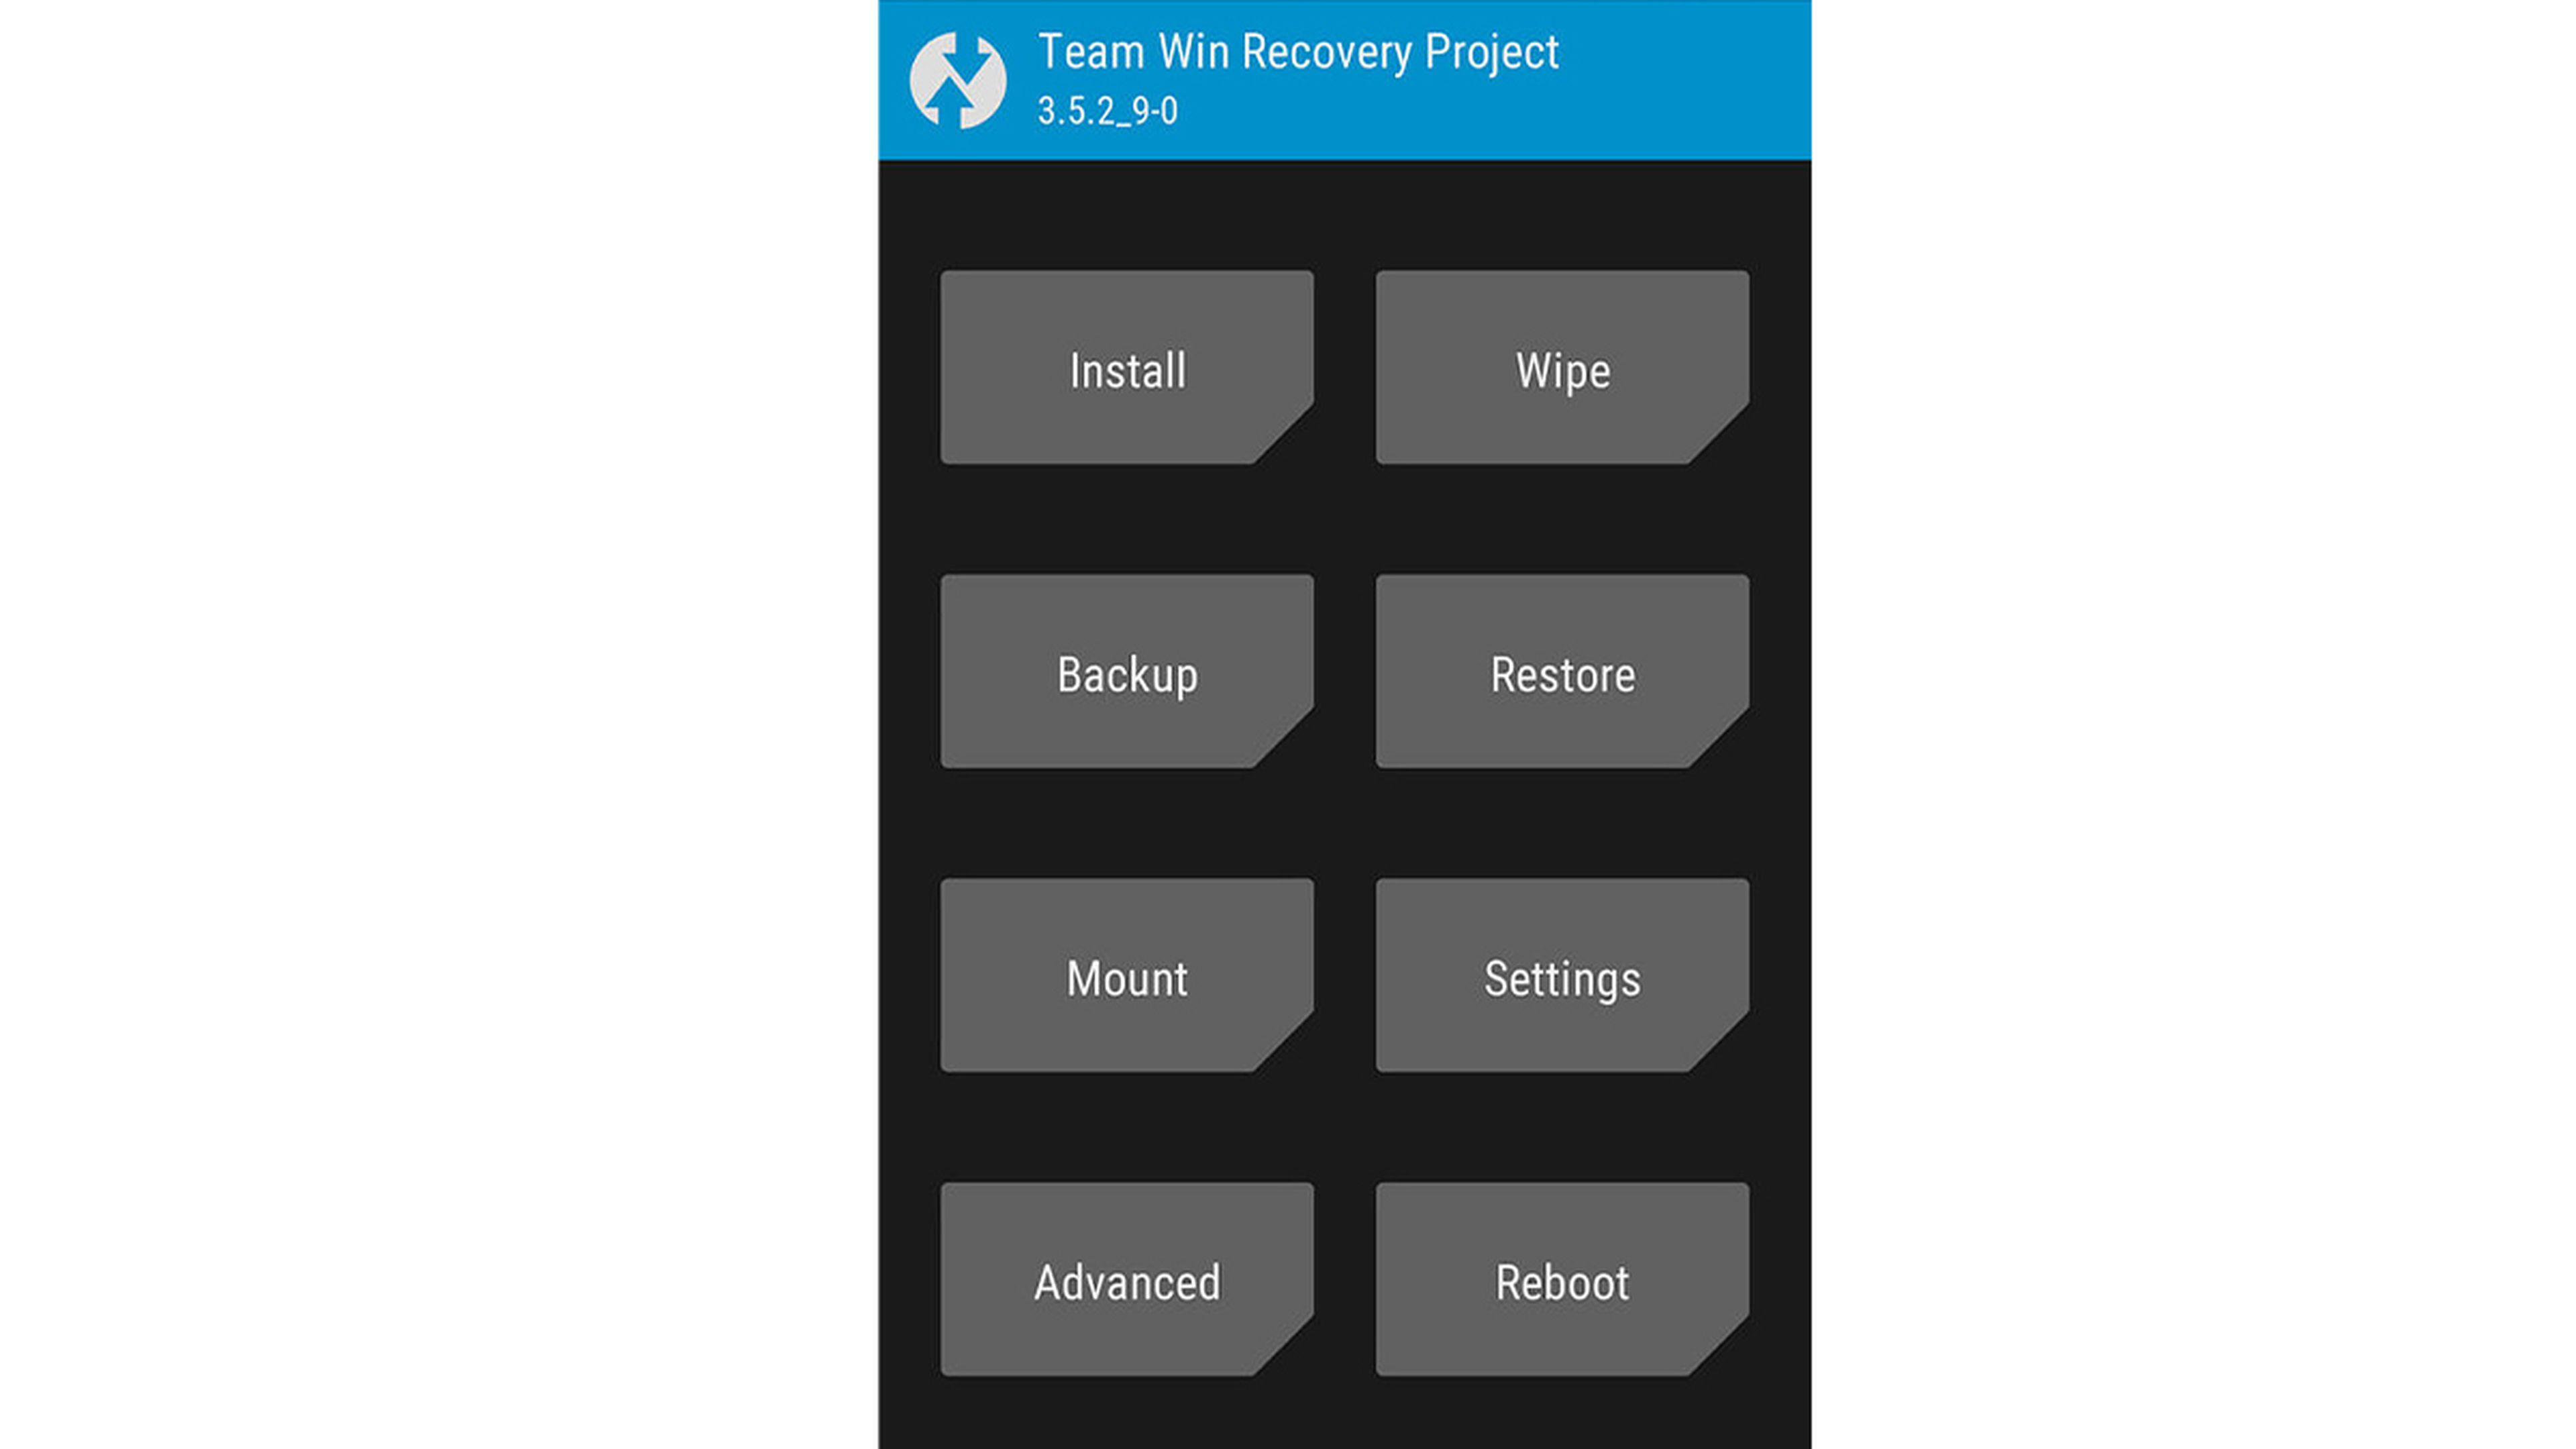 Recovery TWRP